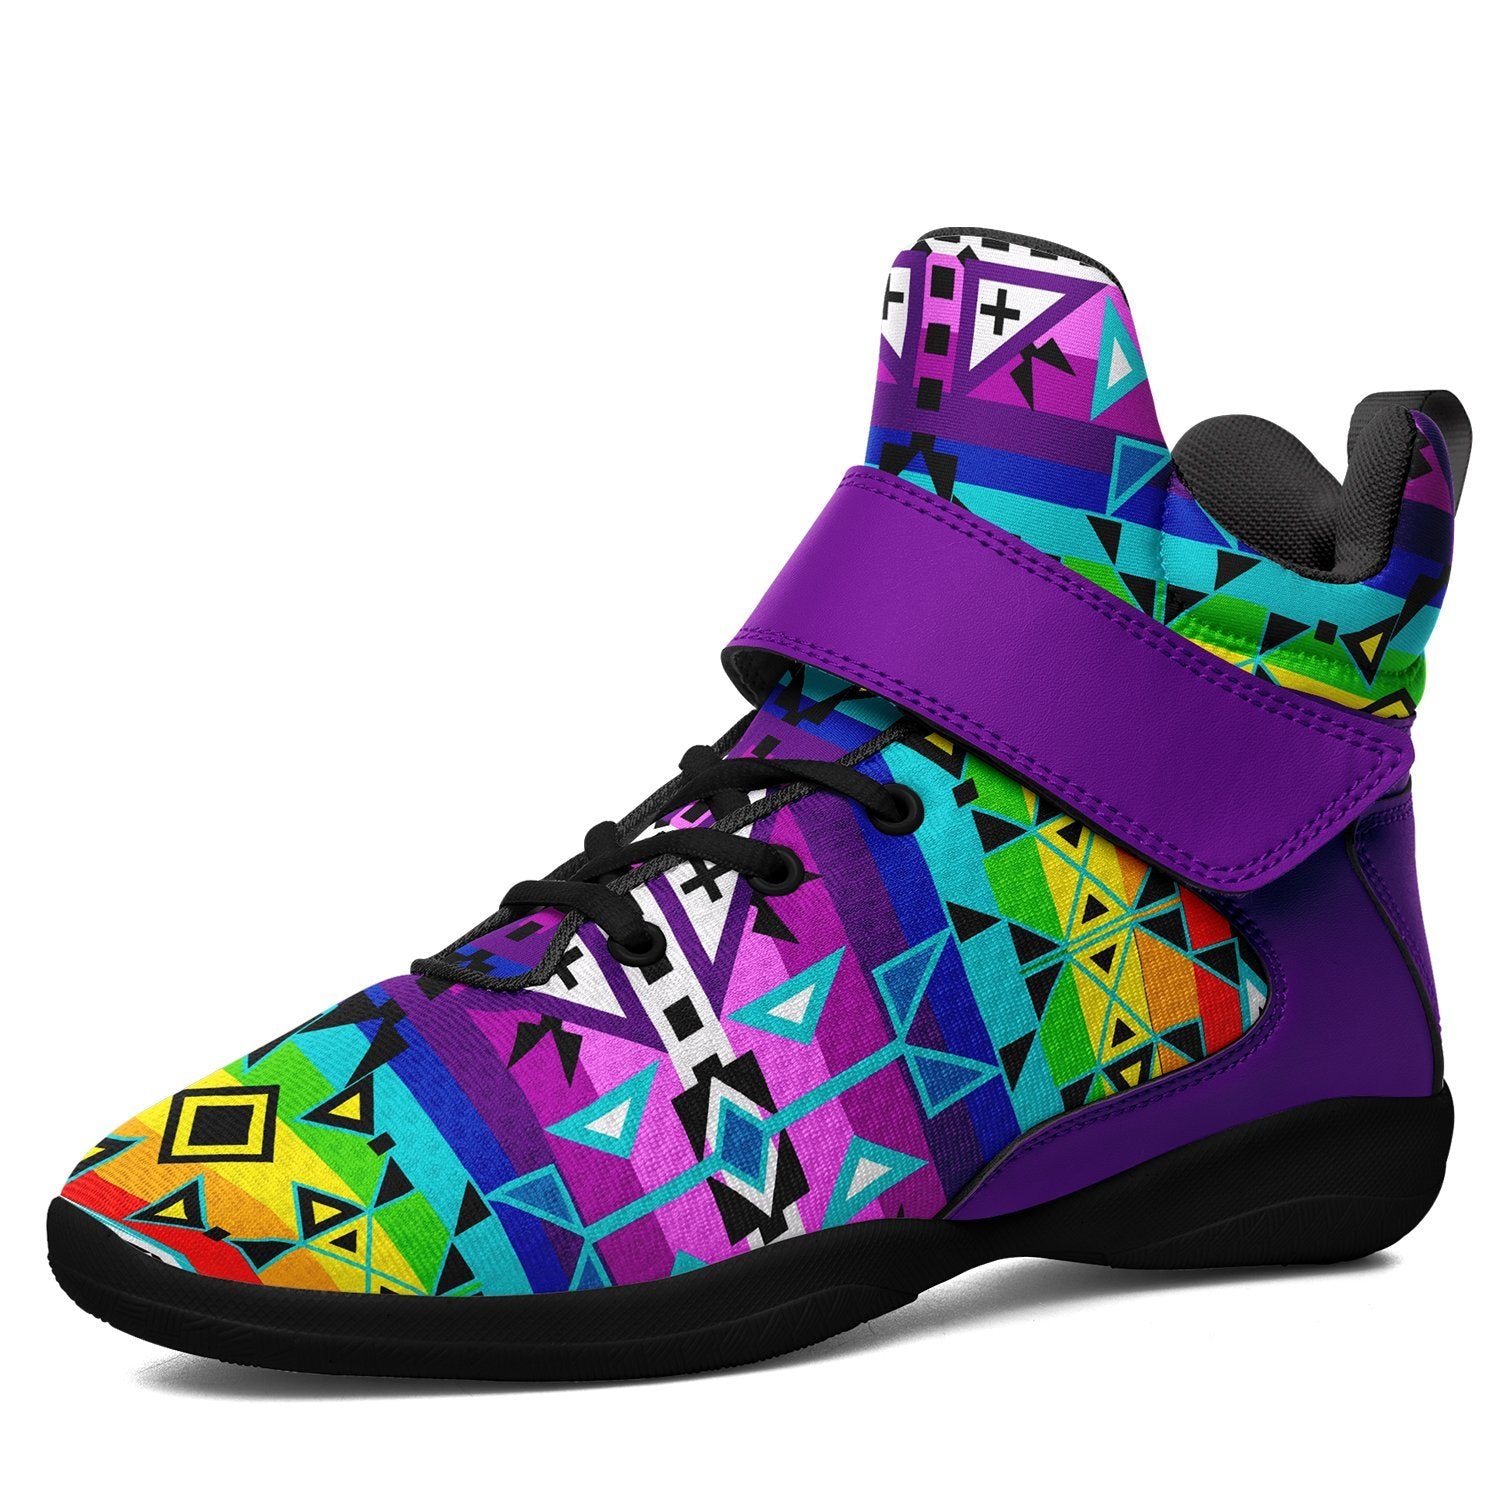 After the Rain Ipottaa Basketball / Sport High Top Shoes 49 Dzine US Women 4.5 / US Youth 3.5 / EUR 35 Black Sole with Indigo Strap 